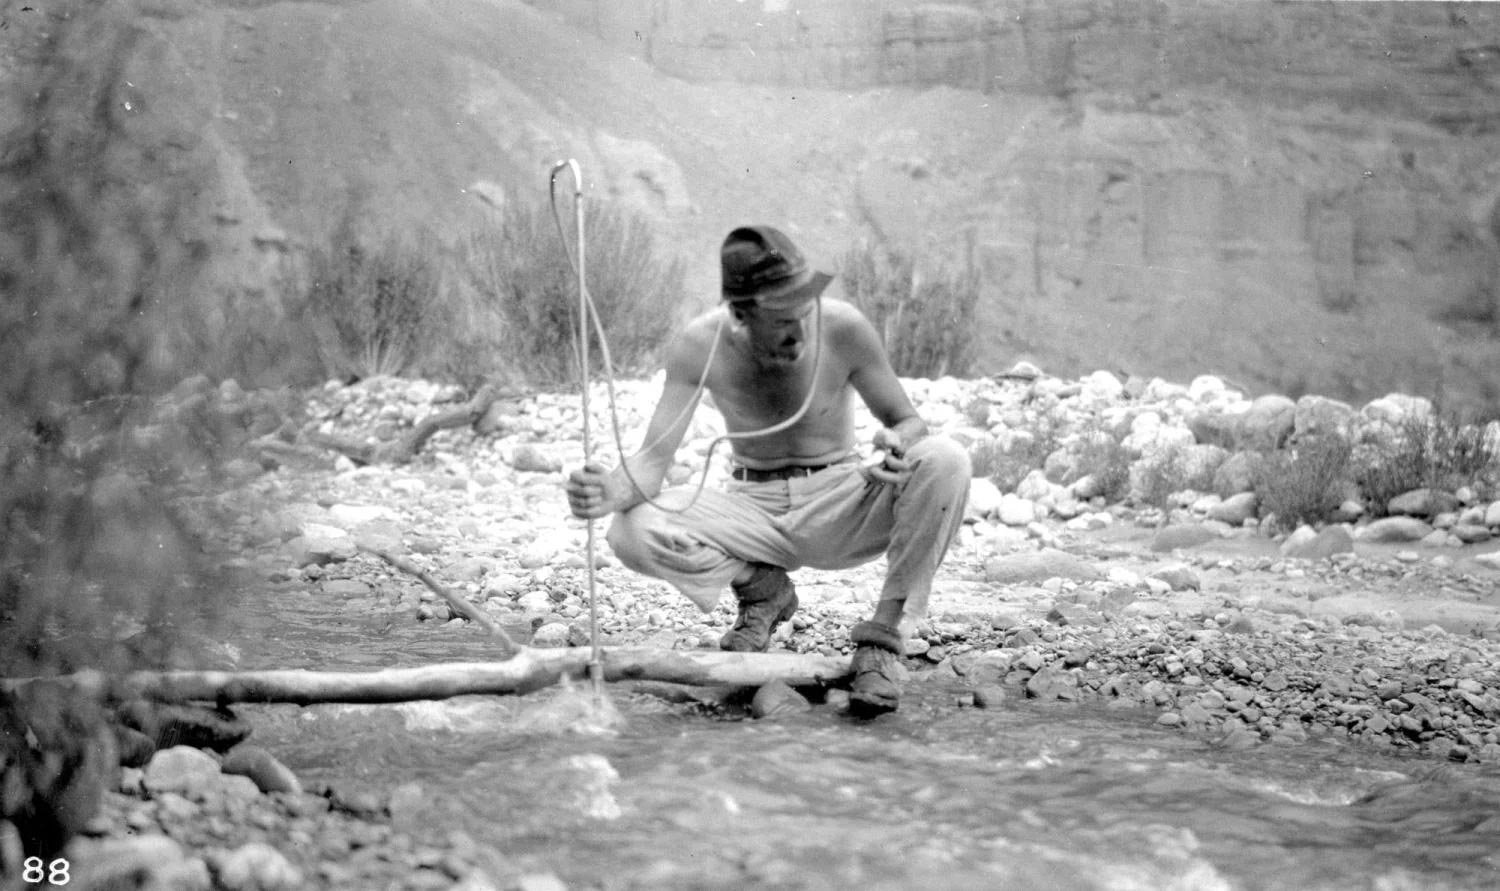 How an Overlooked Study Over a Century Ago Helped Fuel the Colorado River Crisis